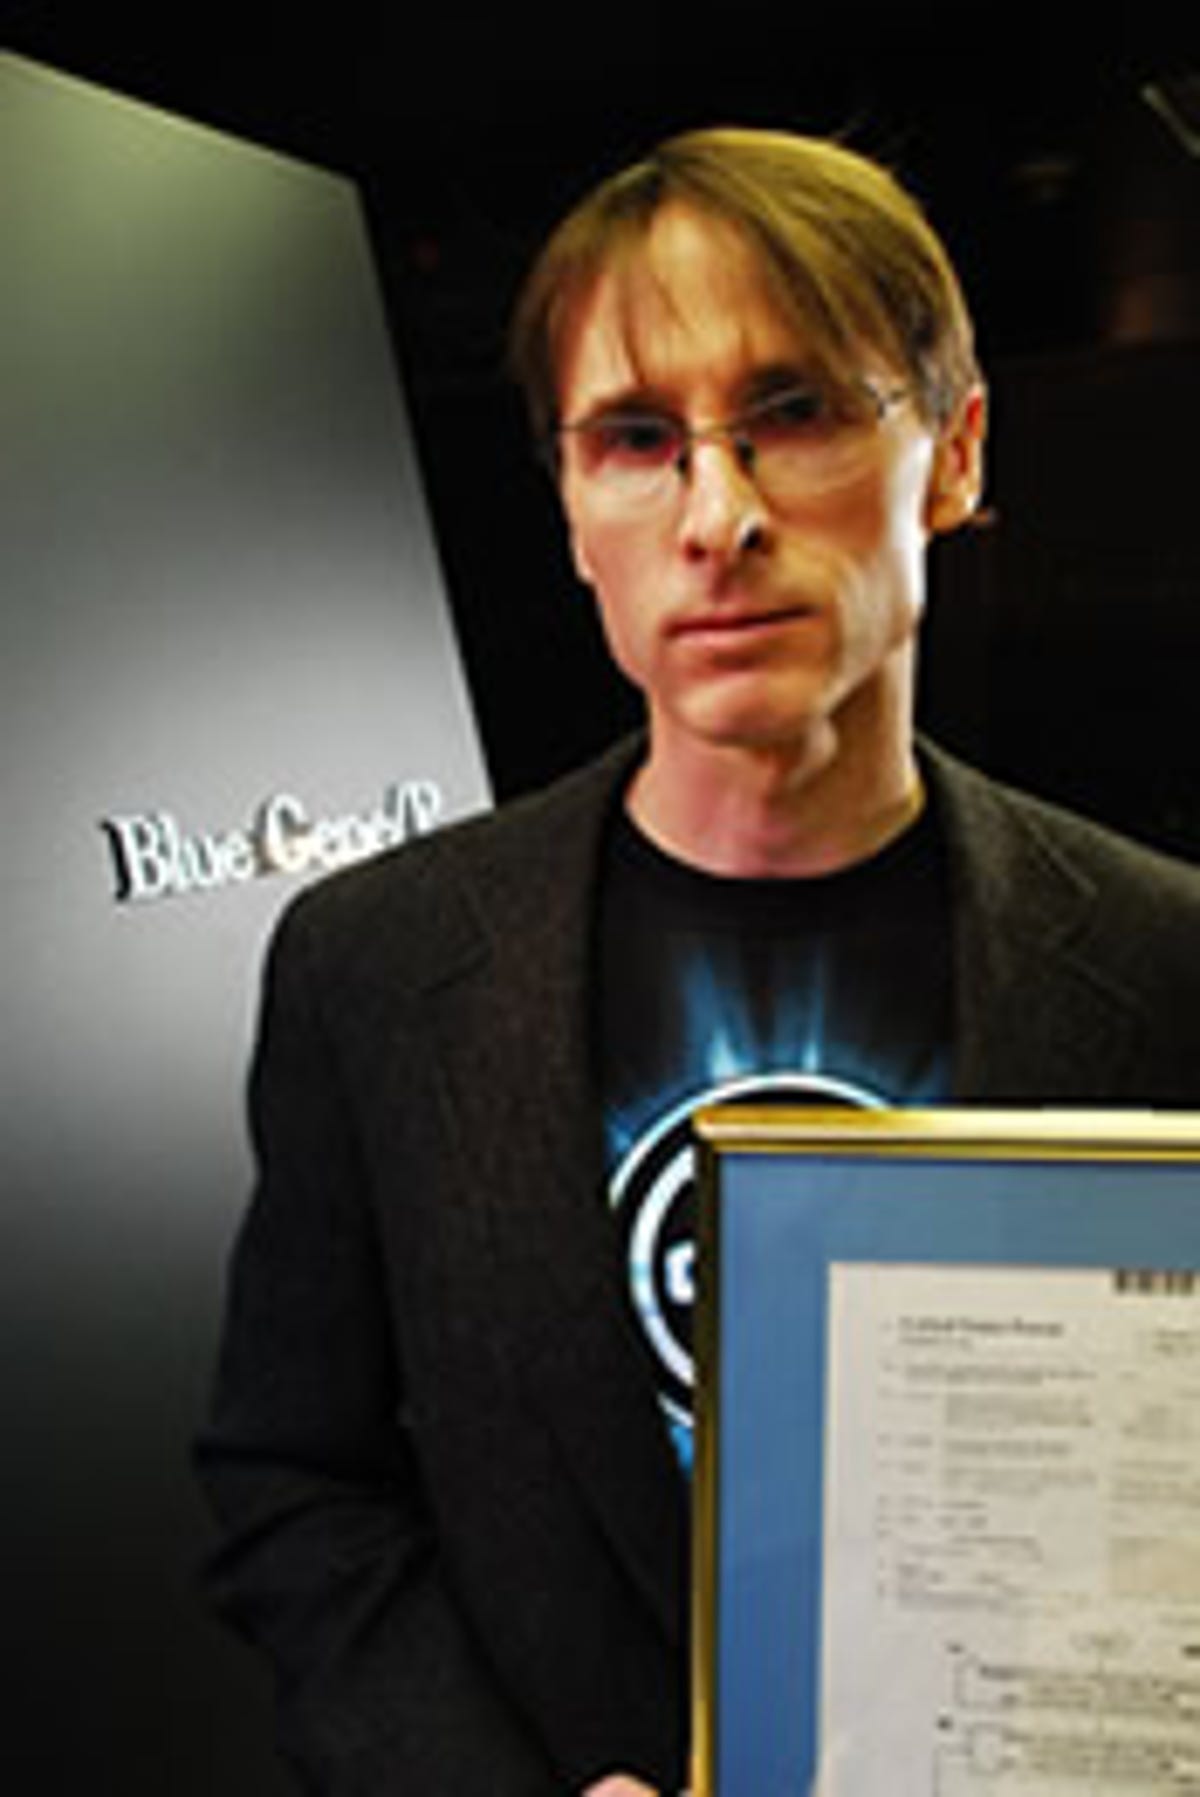 IBM inventor John Gunnels holds U.S. Patent No. 7,506,196, one of 4,914 patents IBM received in 2009.